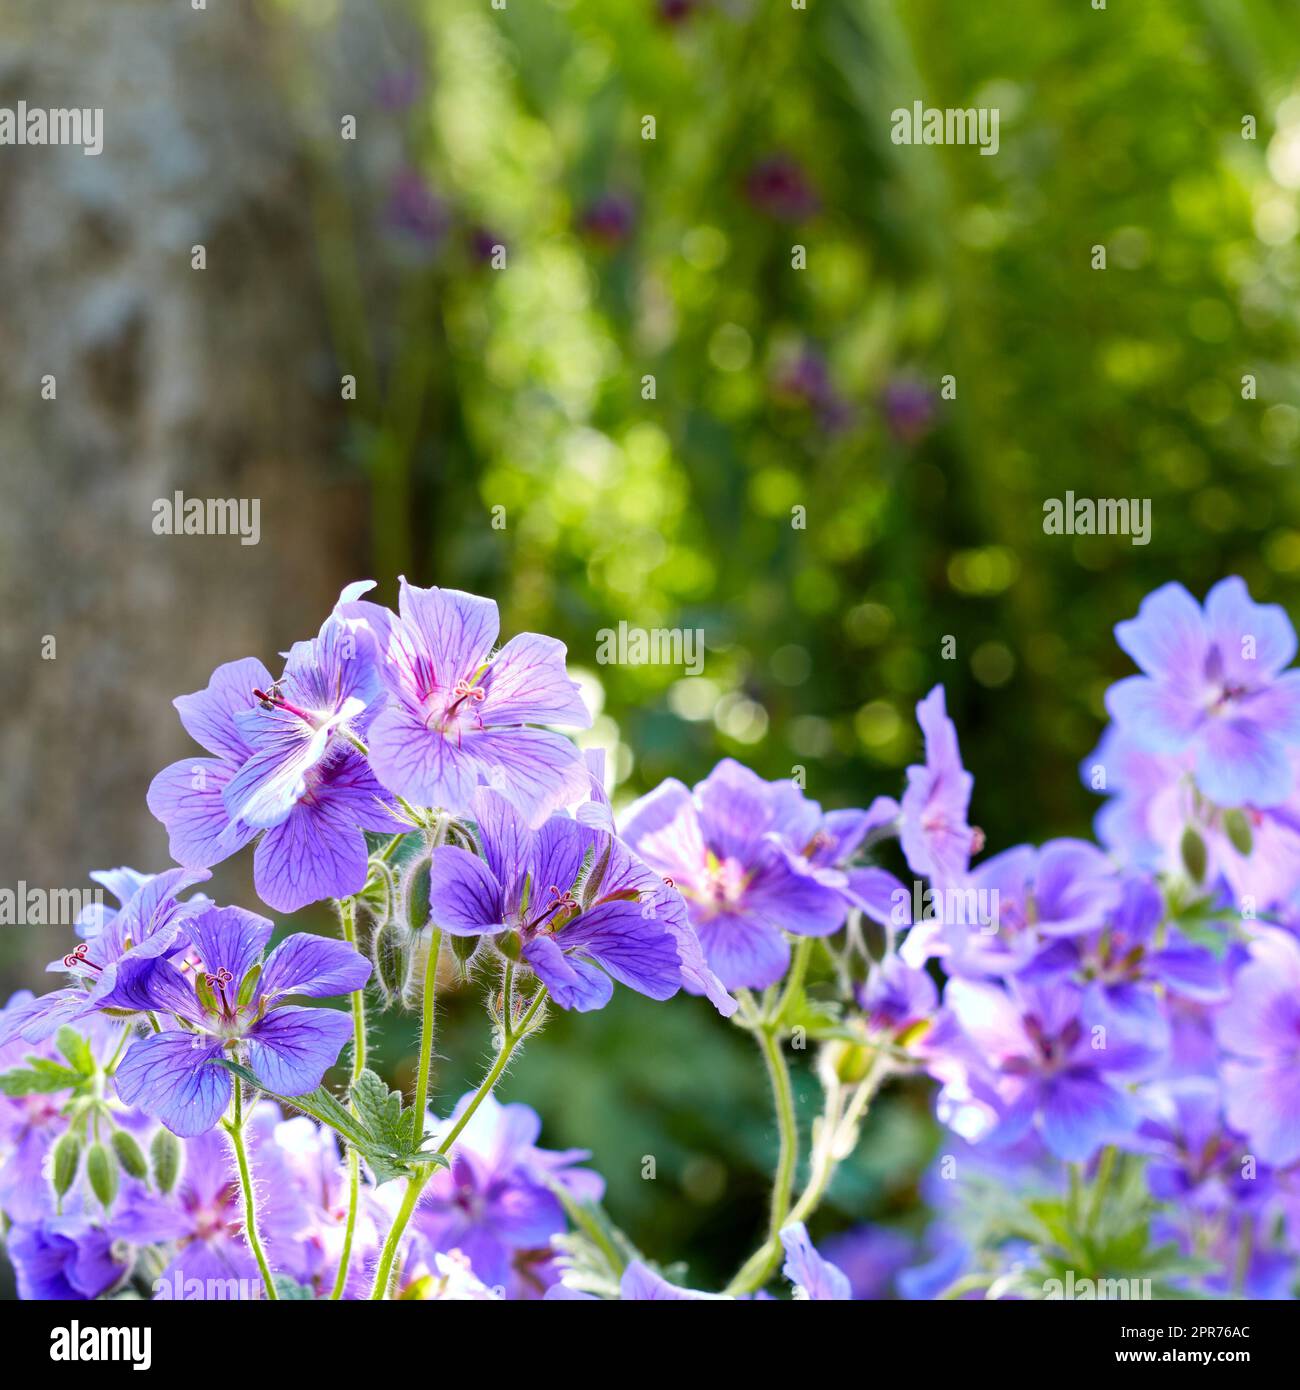 Purple plants and flowers growing in a green garden in spring. Meadow geranium plant blooming and flourishing in a lush field in summer. Beautiful violet flowering plants budding in a forest Stock Photo